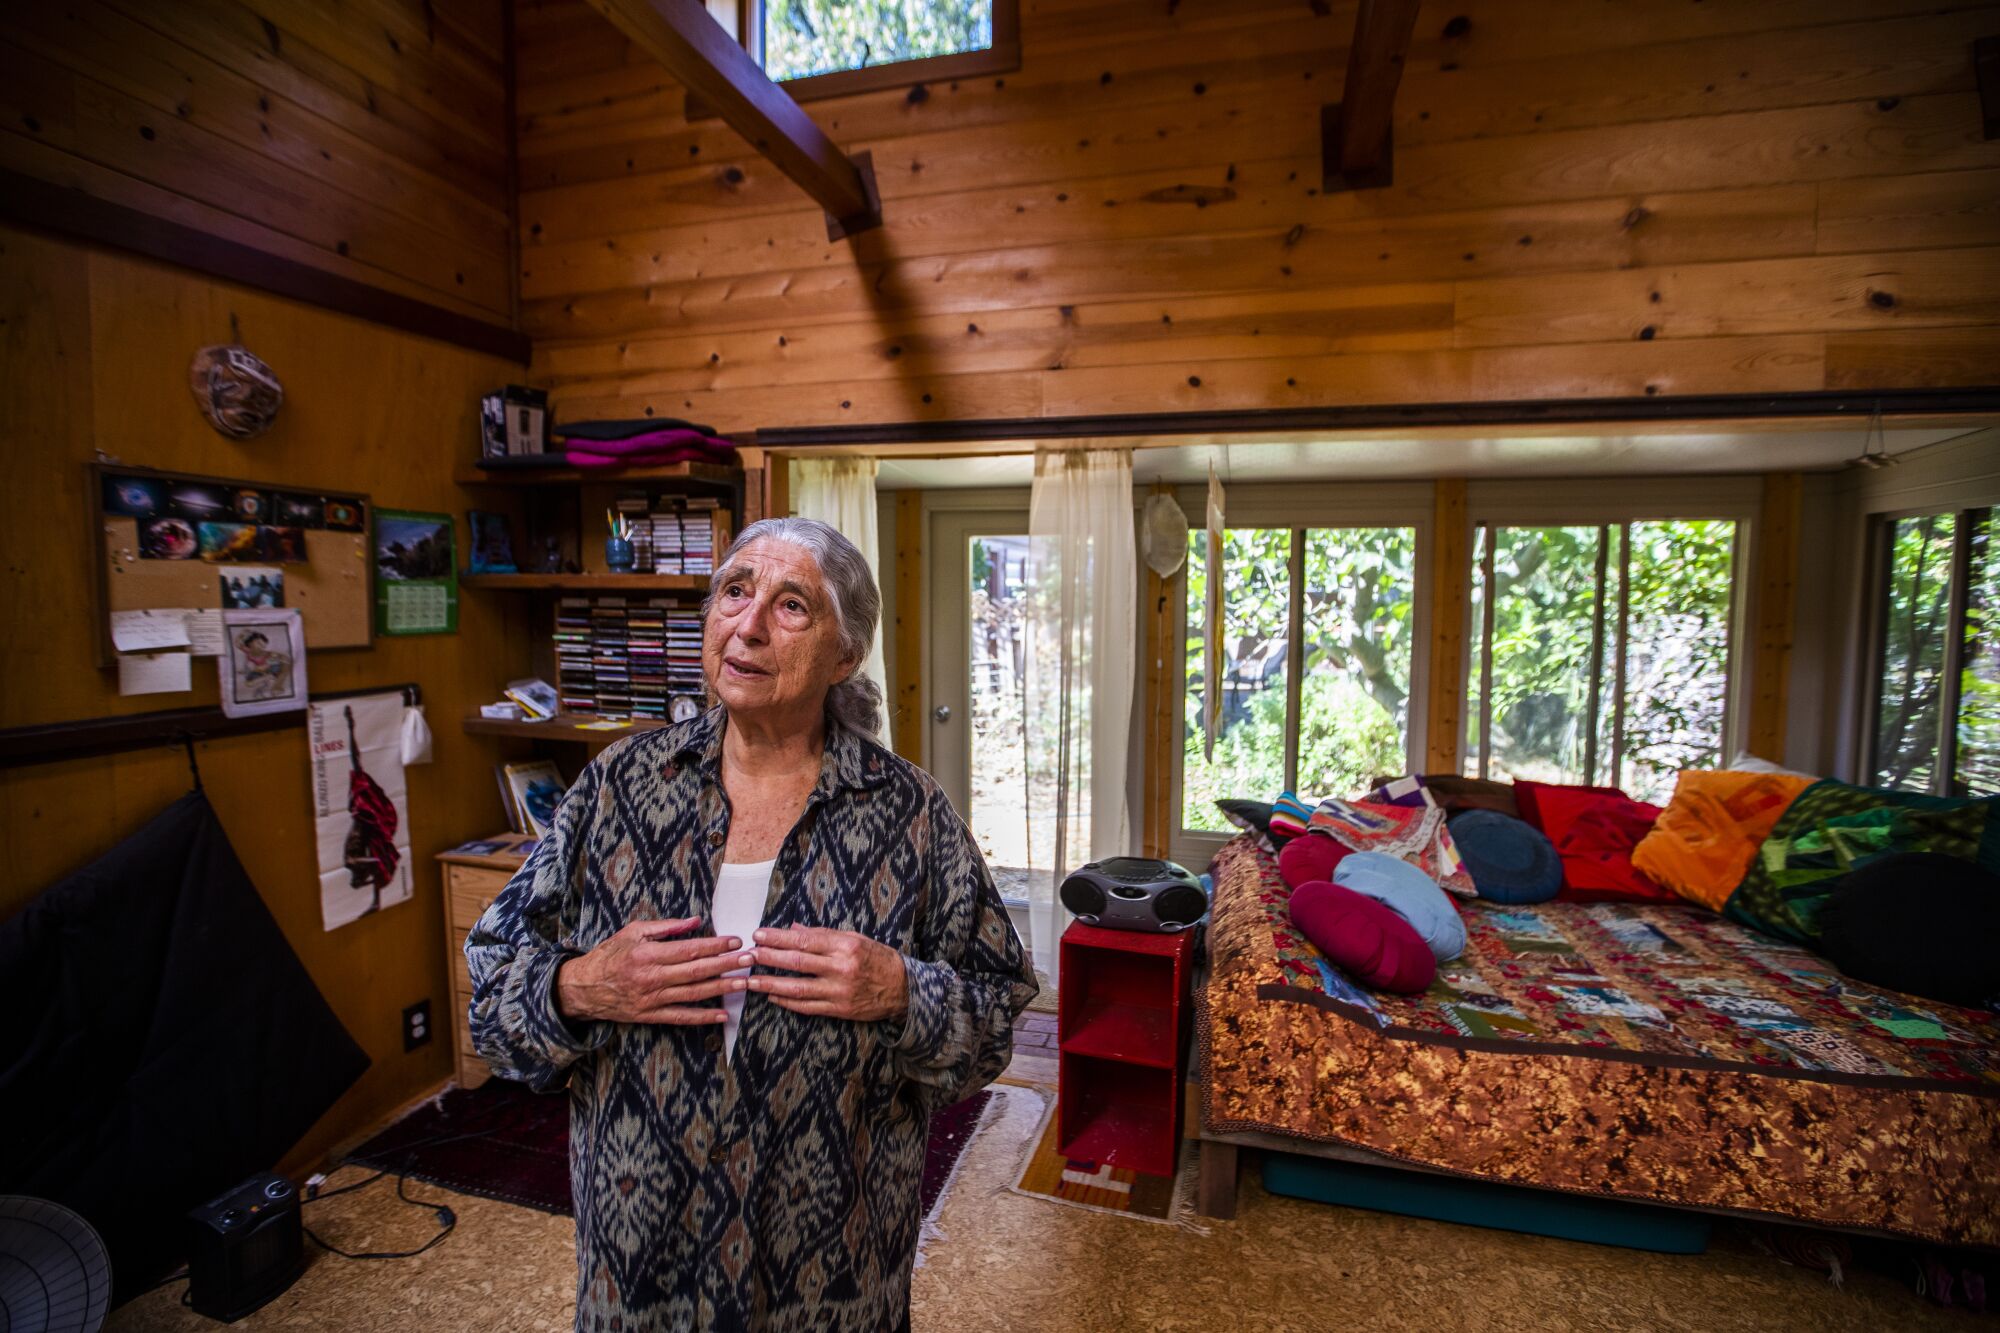 Carolyn North is a dancer and widow of a former UC Berkeley chemistry professor. Instead of leaving her Berkeley home to her three children, North is donating it to the East Bay Permanent Real Estate Cooperative, which, in turn, will hold the land in trust and rent rooms.